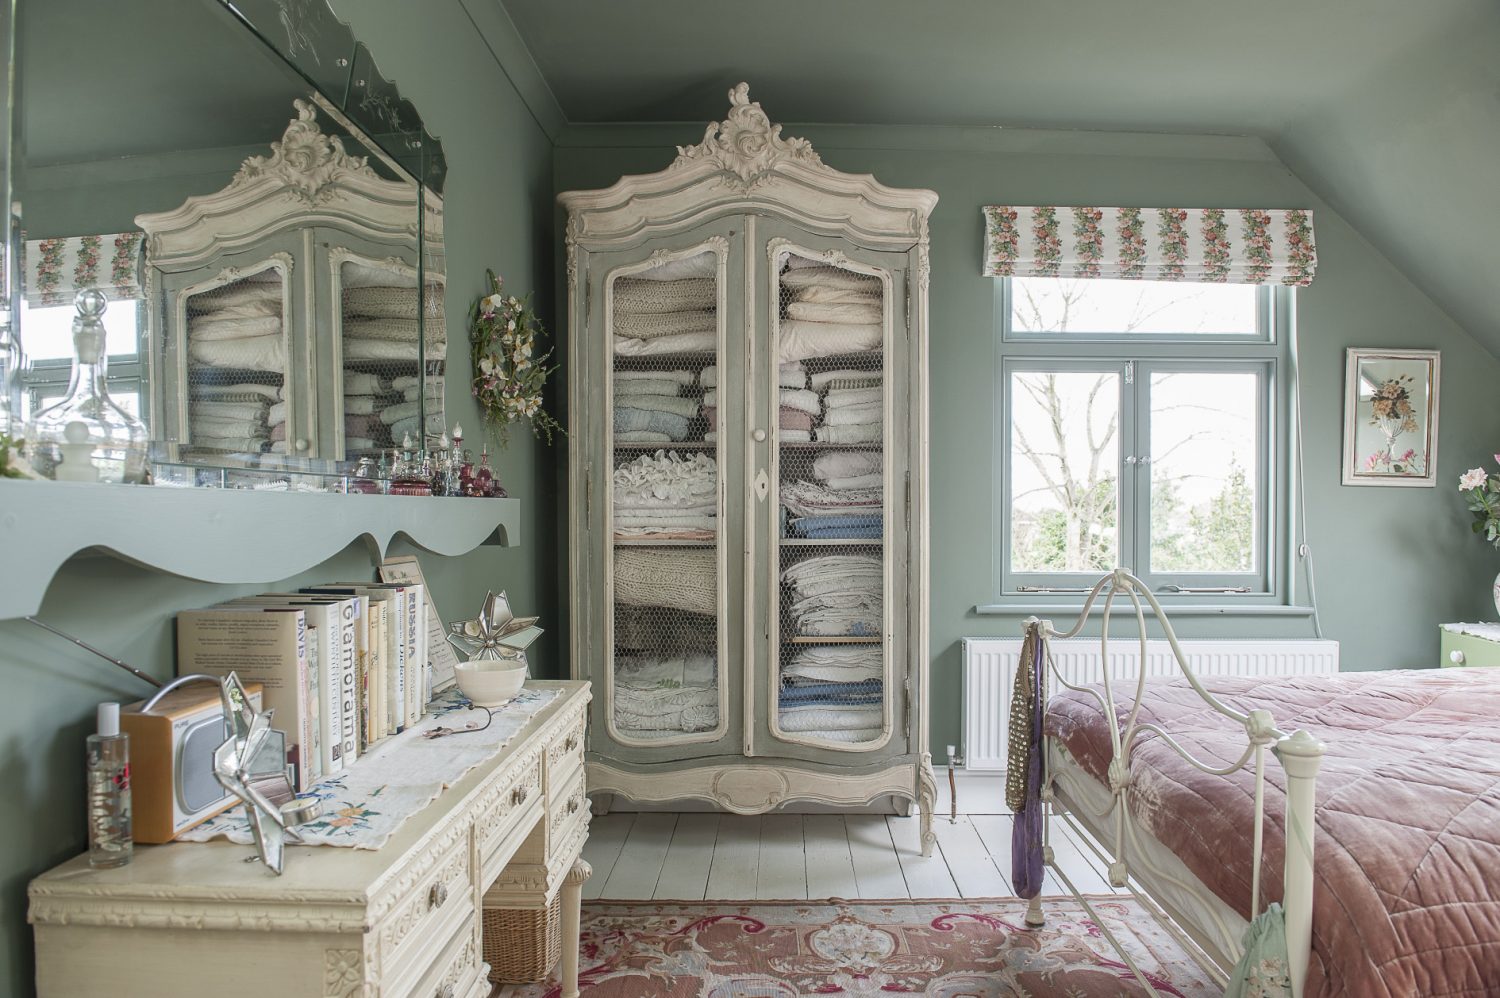 One of the bedrooms is nicknamed ‘the Flower Room’ because it is the more feminine of the two guest rooms and features various floral motifs. The delicate blind is a piece of vintage Sanderson fabric Emma found online.